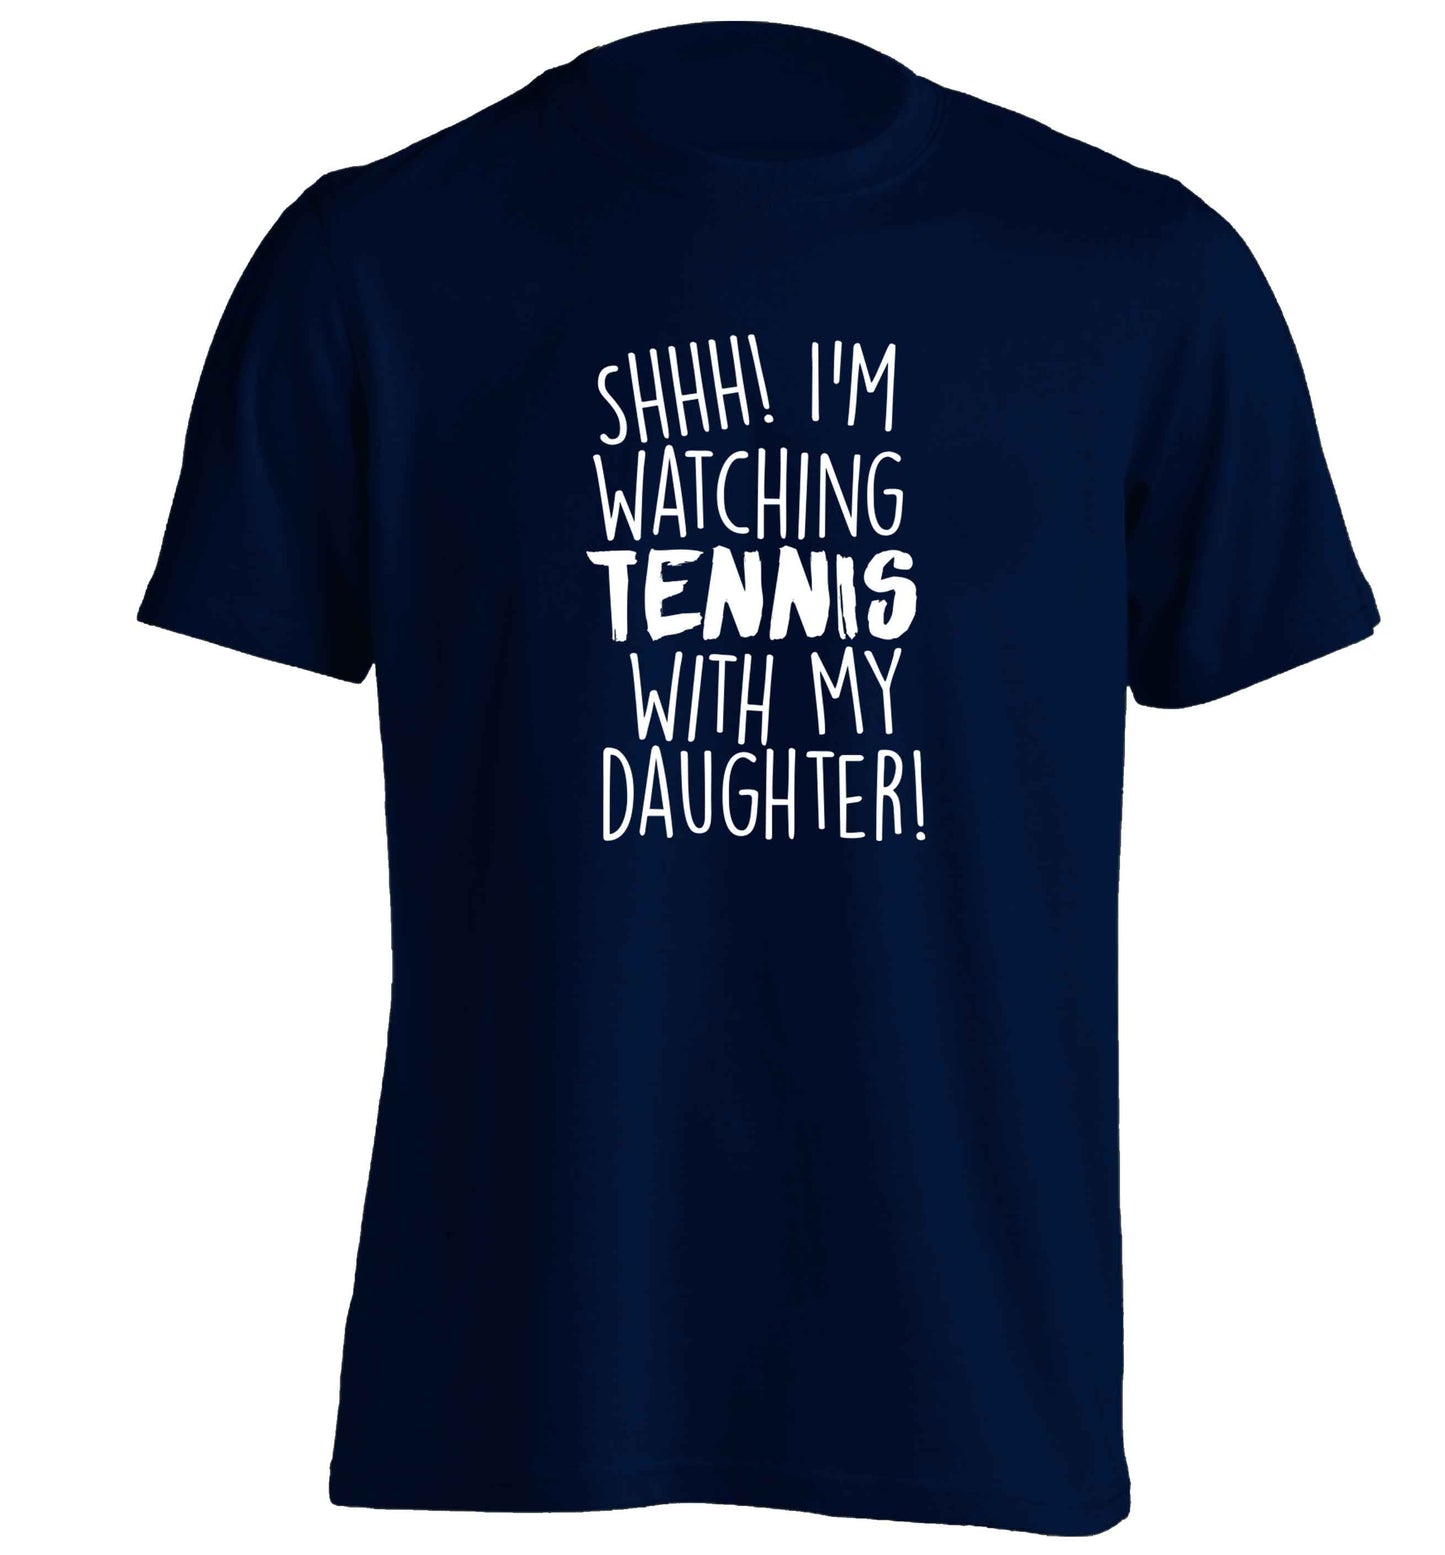 Shh! I'm watching tennis with my daughter! adults unisex navy Tshirt 2XL